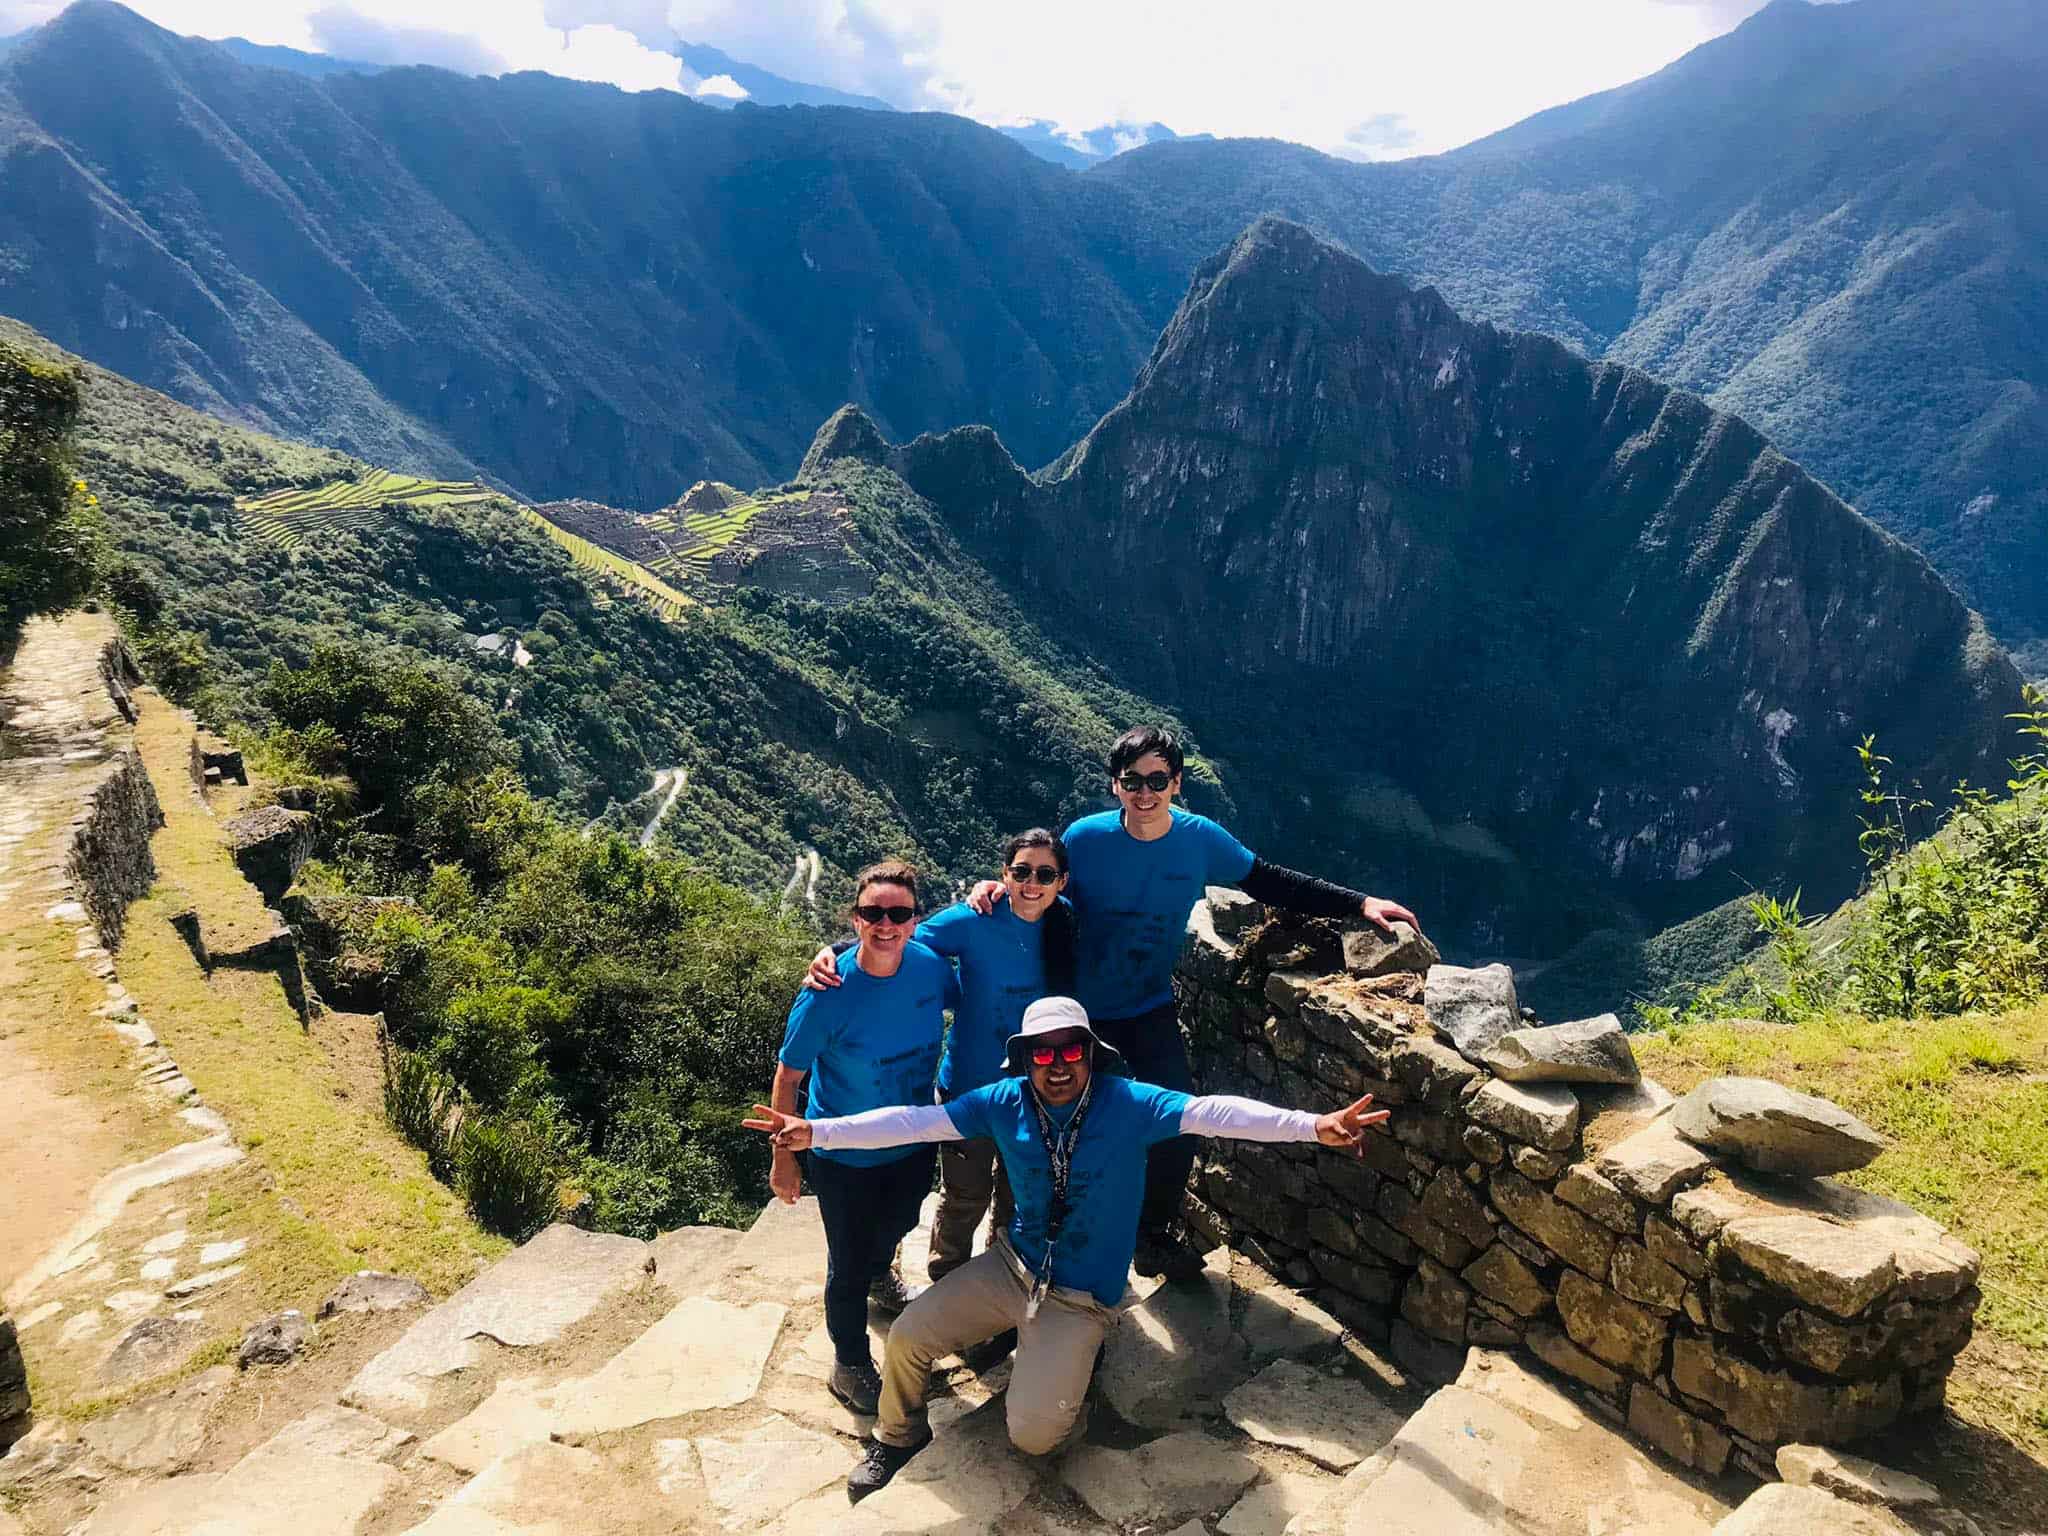 First view of Machu Picchu from Intipunku during the private tour of the Inca Trail